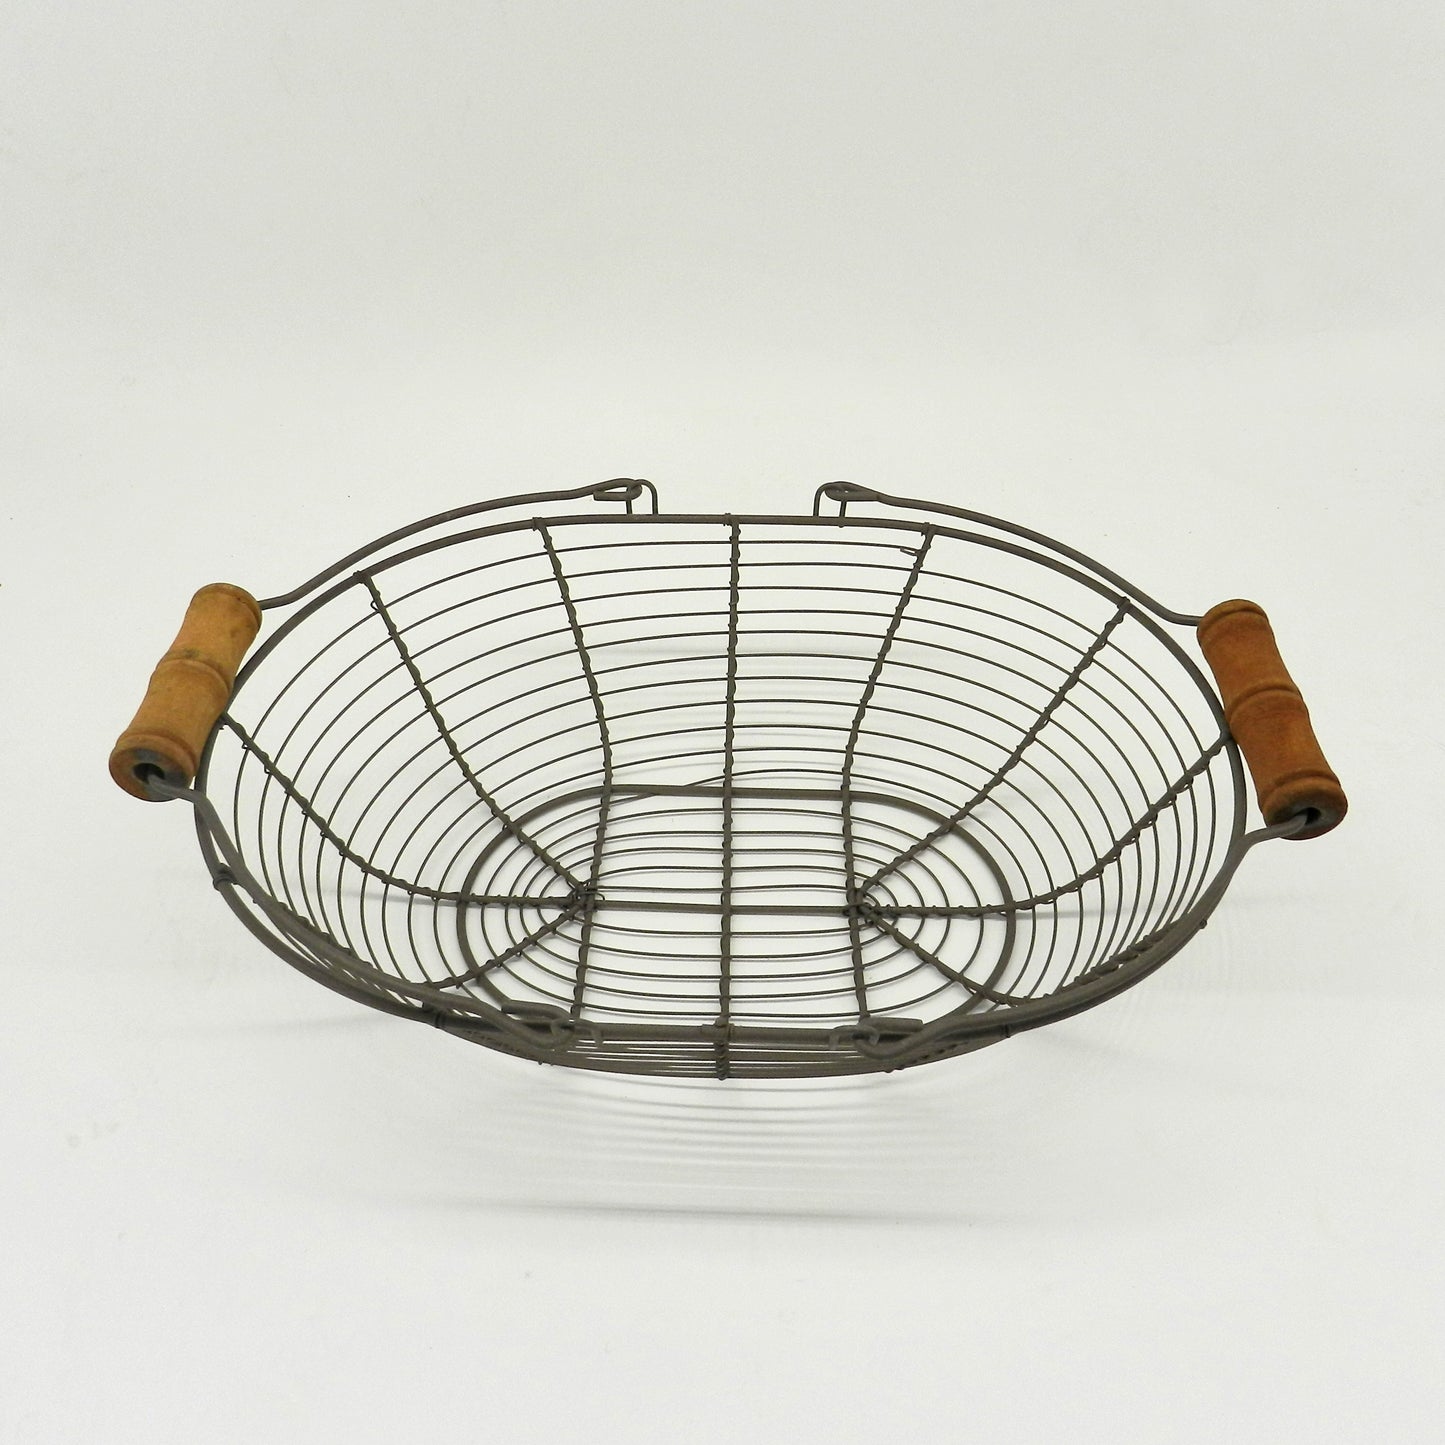 CVHOMEDECO. Oval Metal Wire Egg Basket Wire Basket with Wooden Handle Country Vintage Style Storage Basket. Rusty, 12.75 X 9 X 3.5 Inch